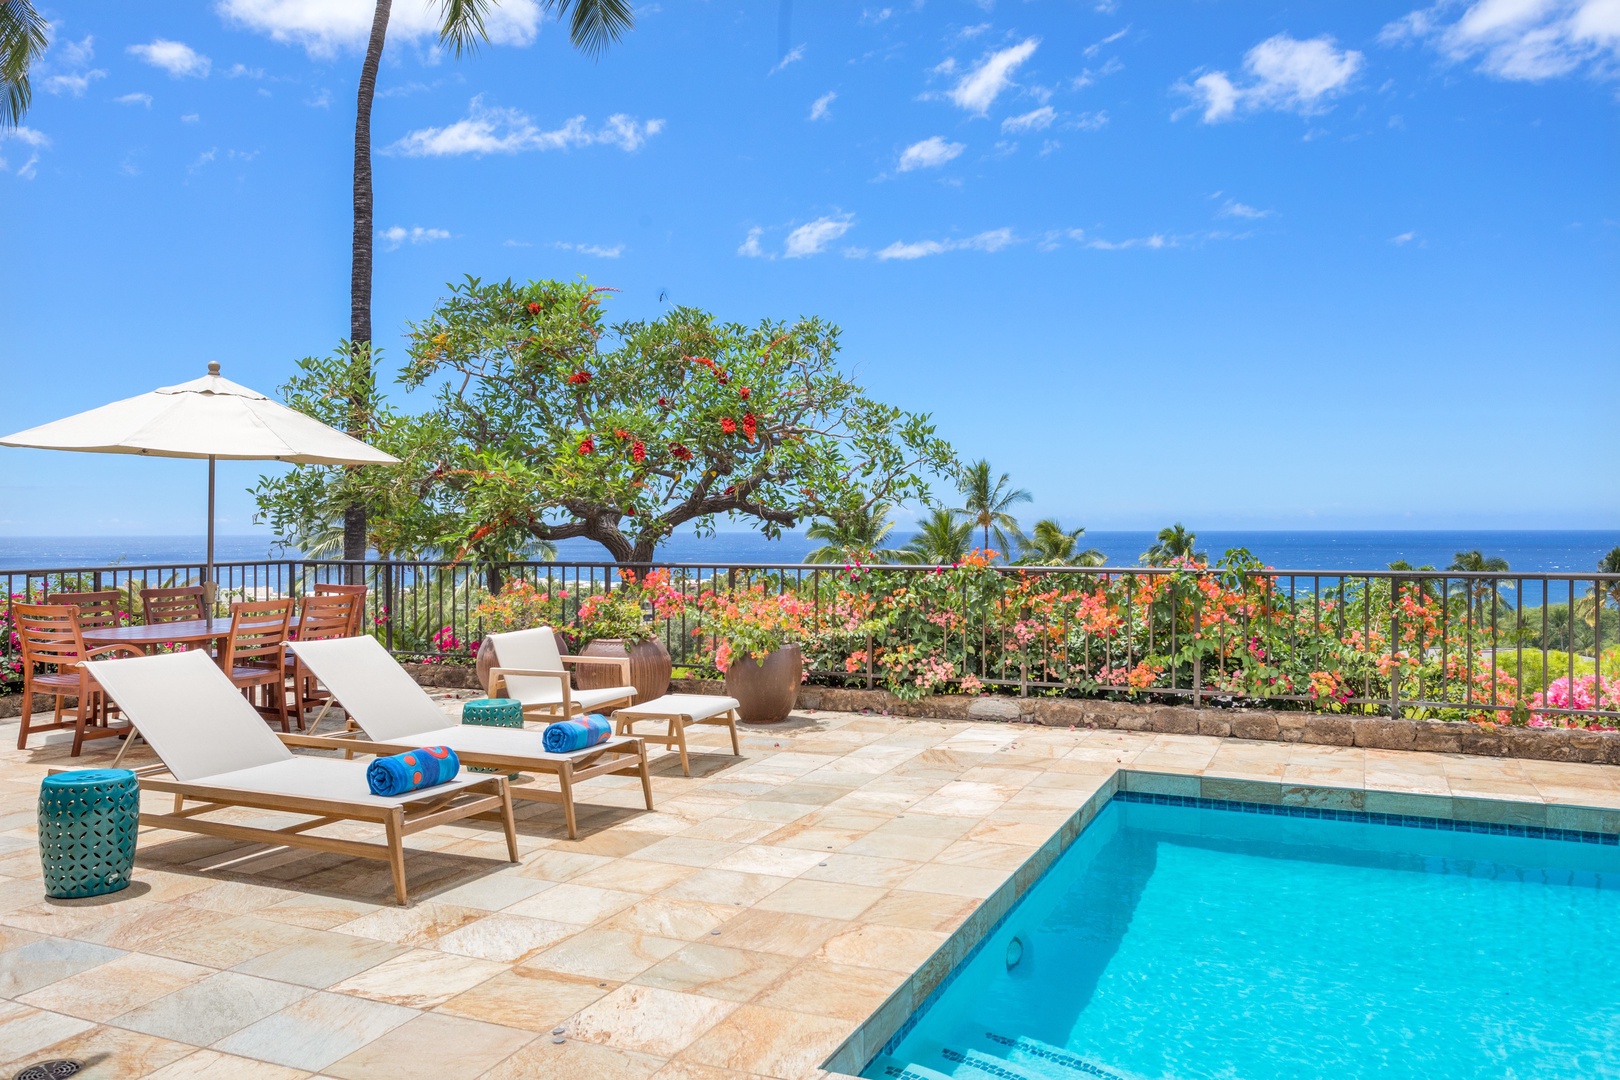 Kamuela Vacation Rentals, 4BD Villas (21) at Mauna Kea Resort - Paradise found! Sweeping Ocean & Coastline Views from Pool Deck & Almost All Rooms. Relax in your own Private Pool w/Plentiful Lounge Seating.